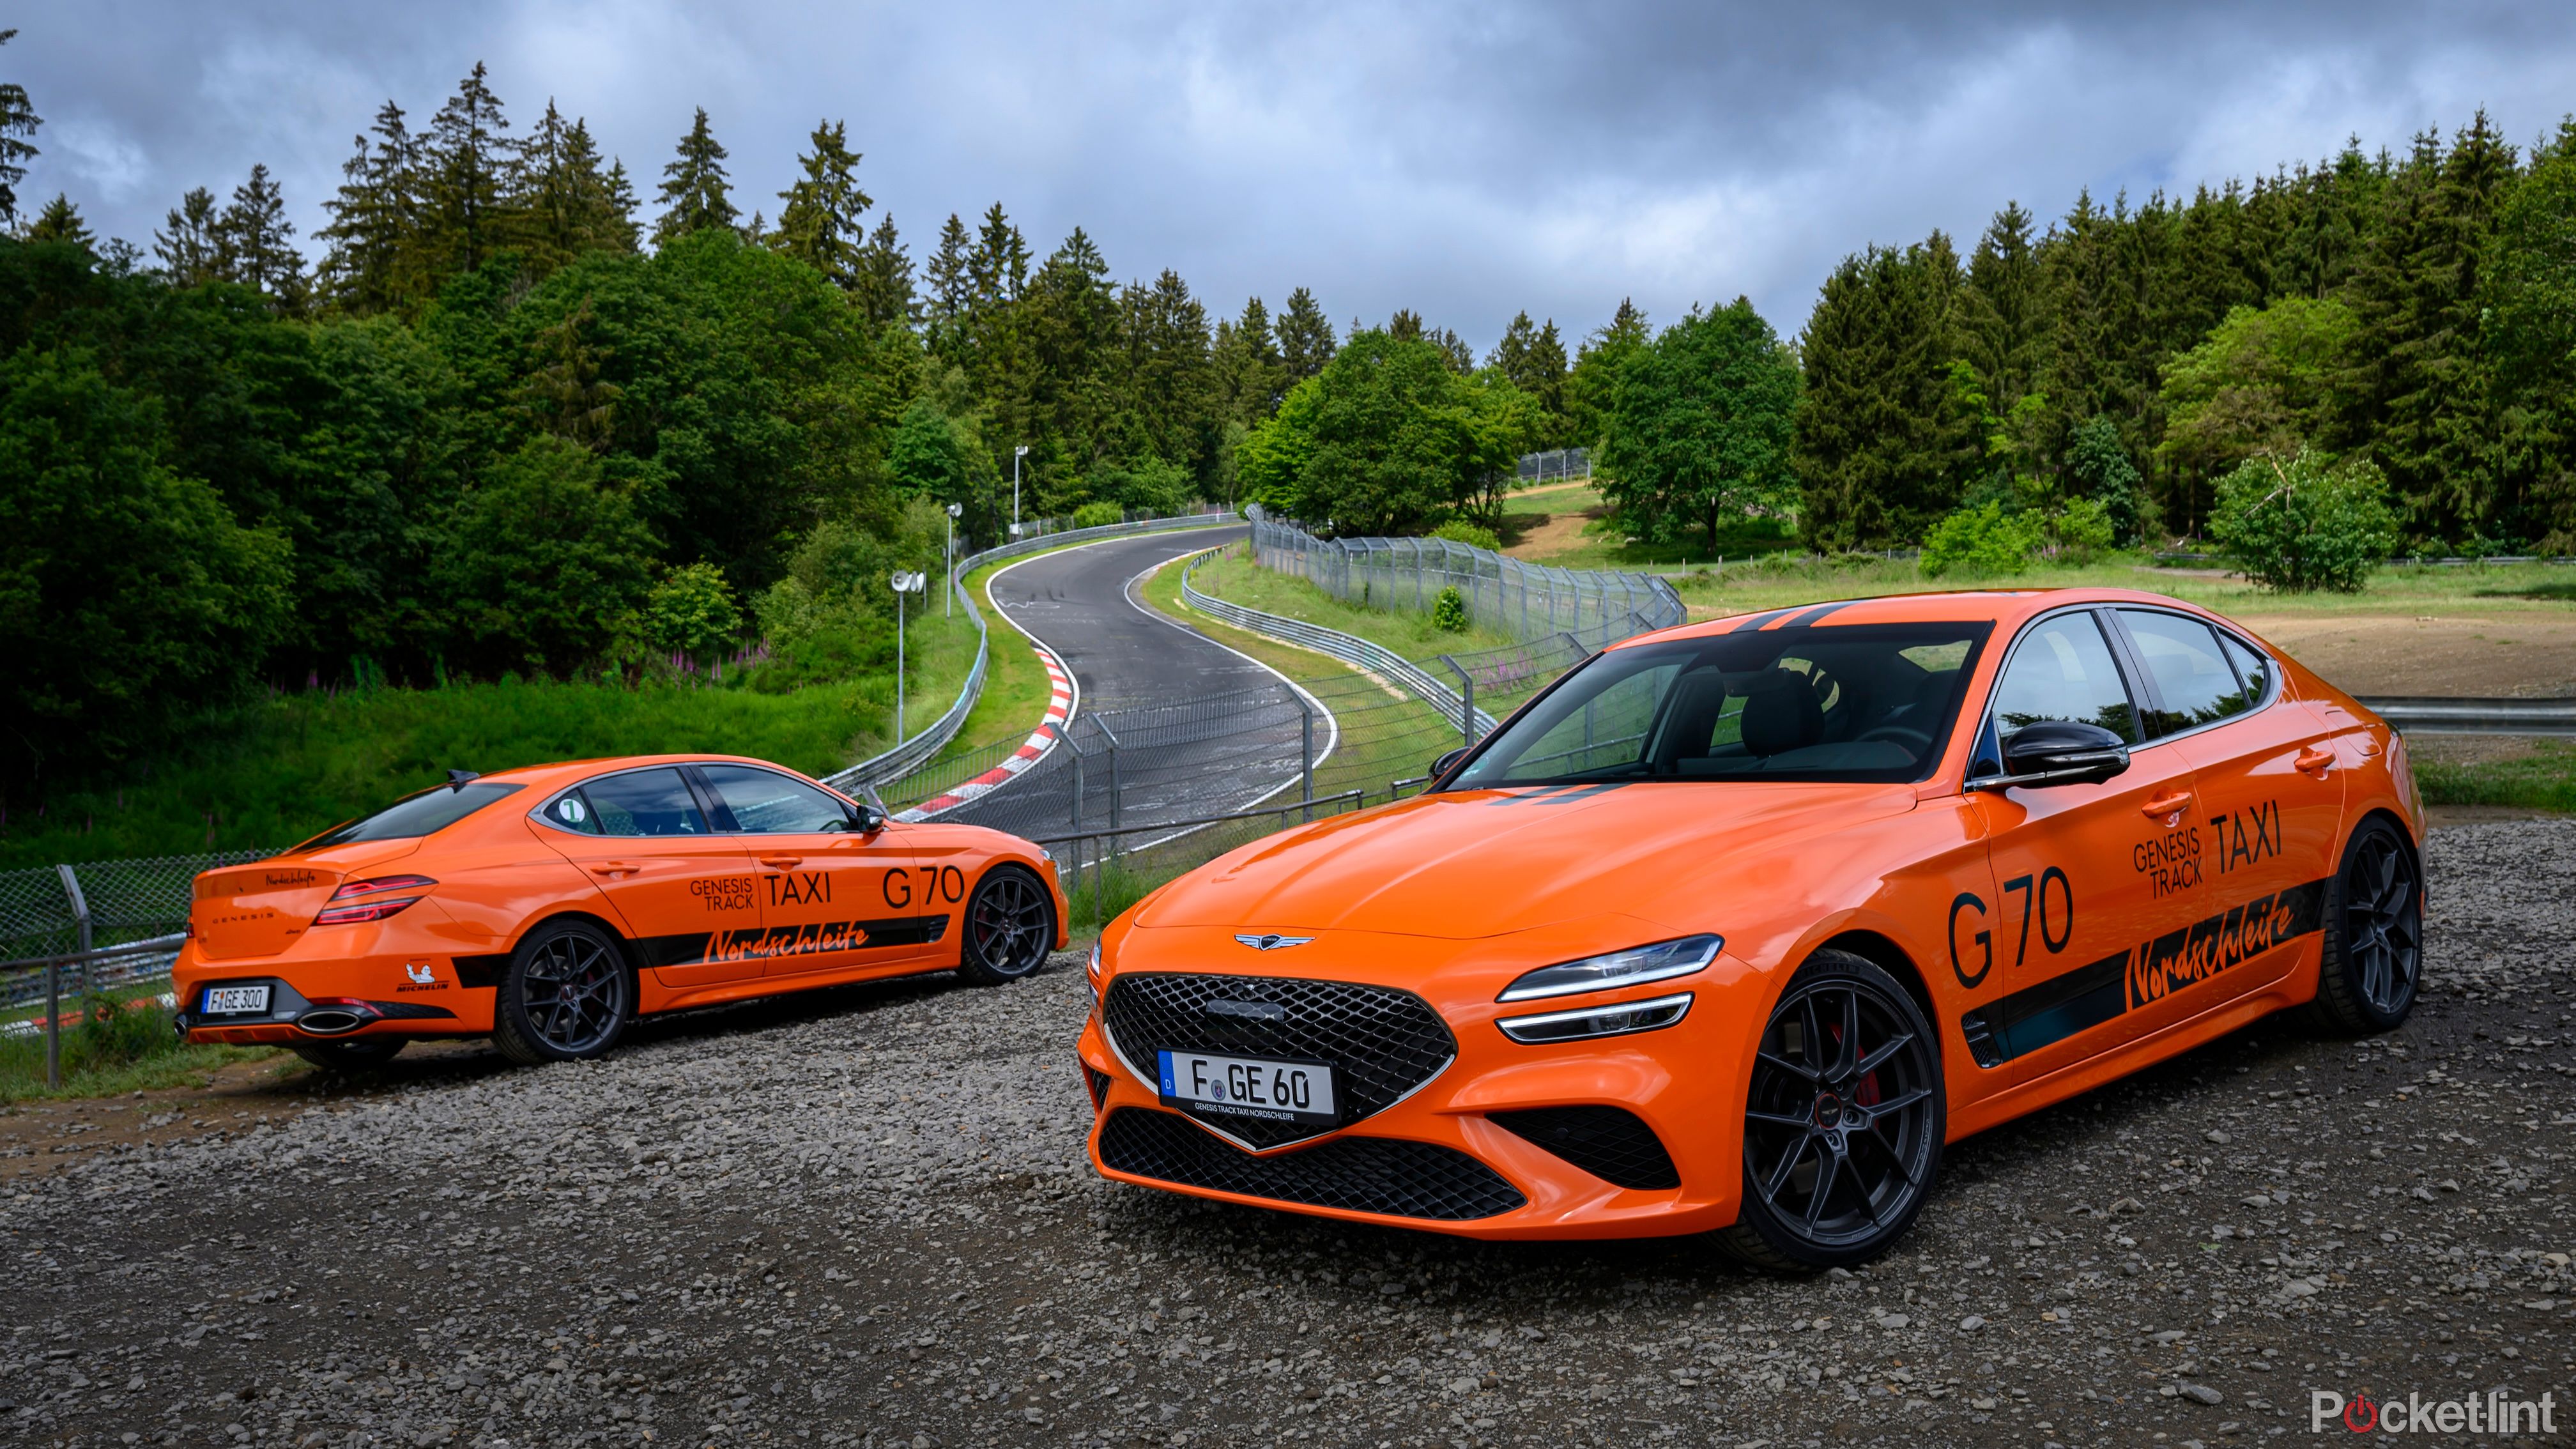 Genesis now offers taxi rides at Germany’s Nrburgring track